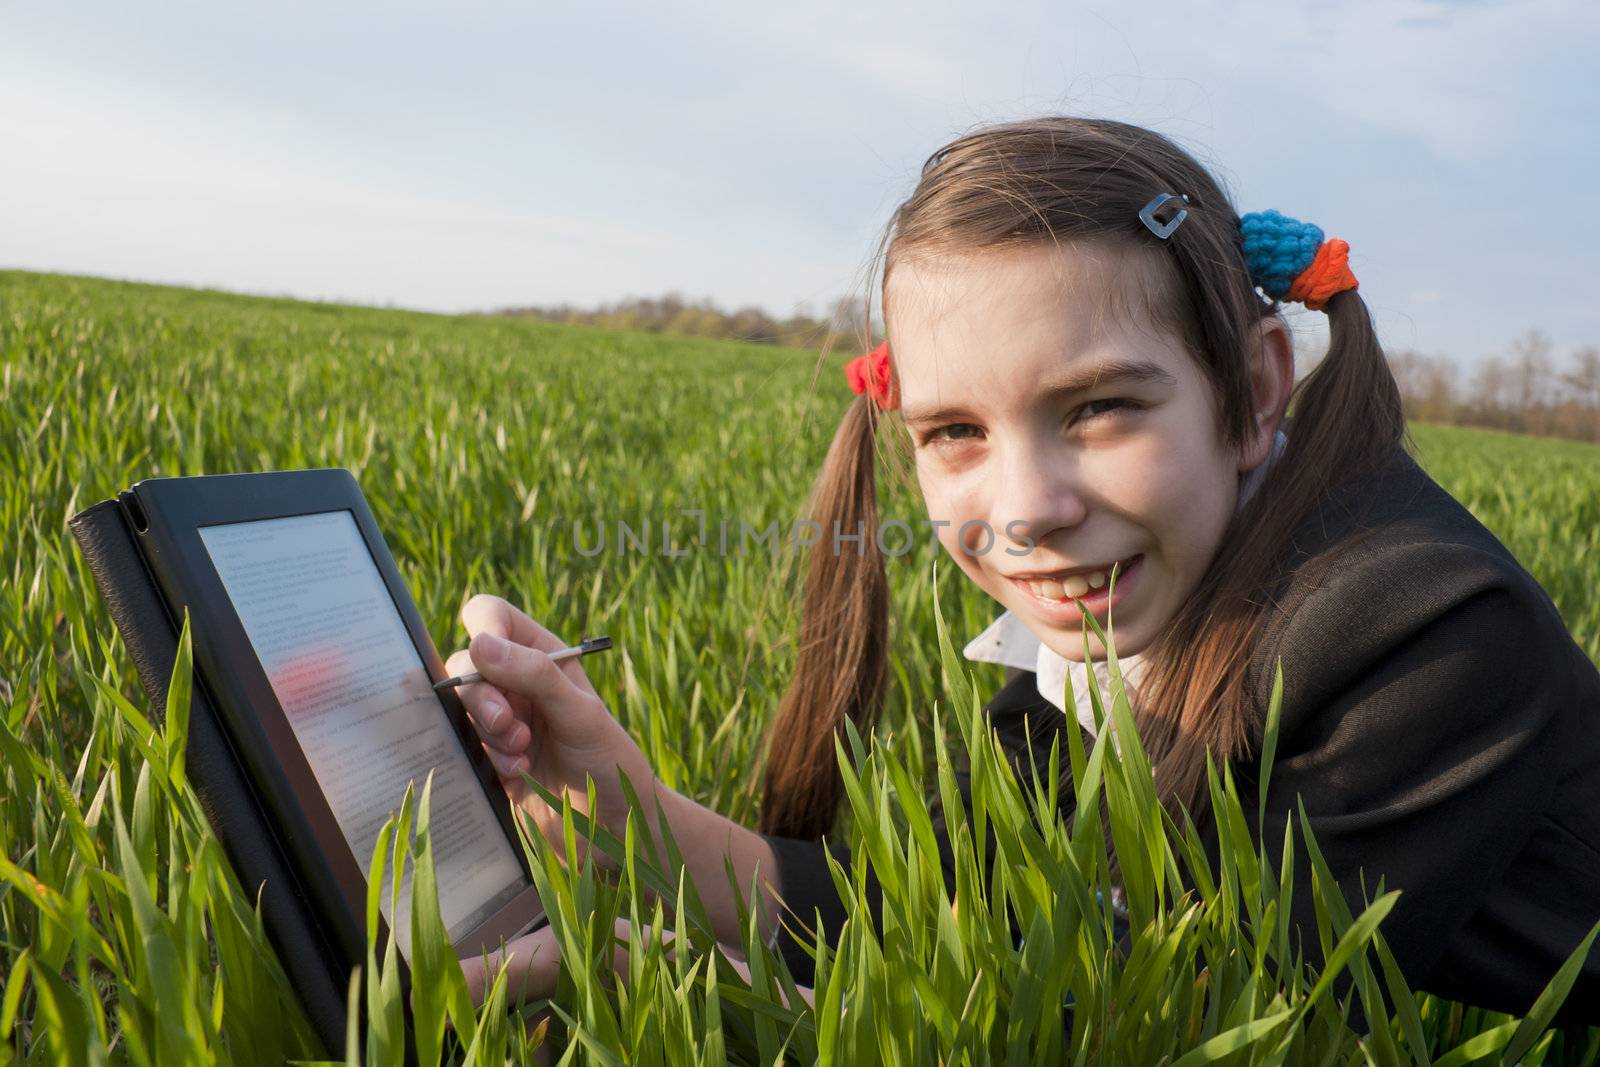 Teen girl with e-book reader laying on grass